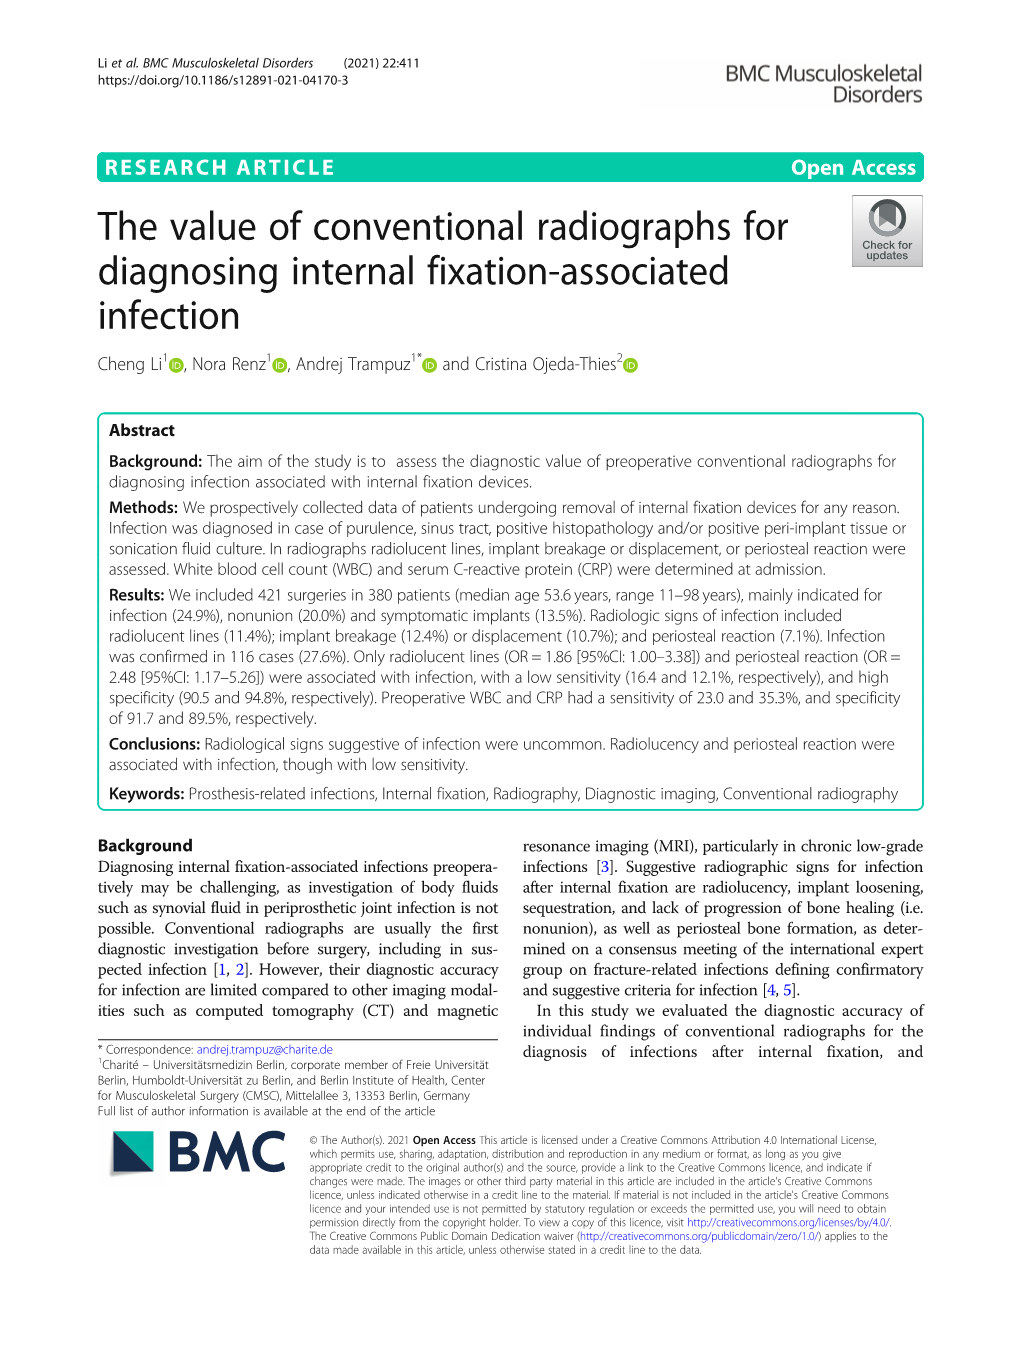 The Value of Conventional Radiographs for Diagnosing Internal Fixation-Associated Infection Cheng Li1 , Nora Renz1 , Andrej Trampuz1* and Cristina Ojeda-Thies2